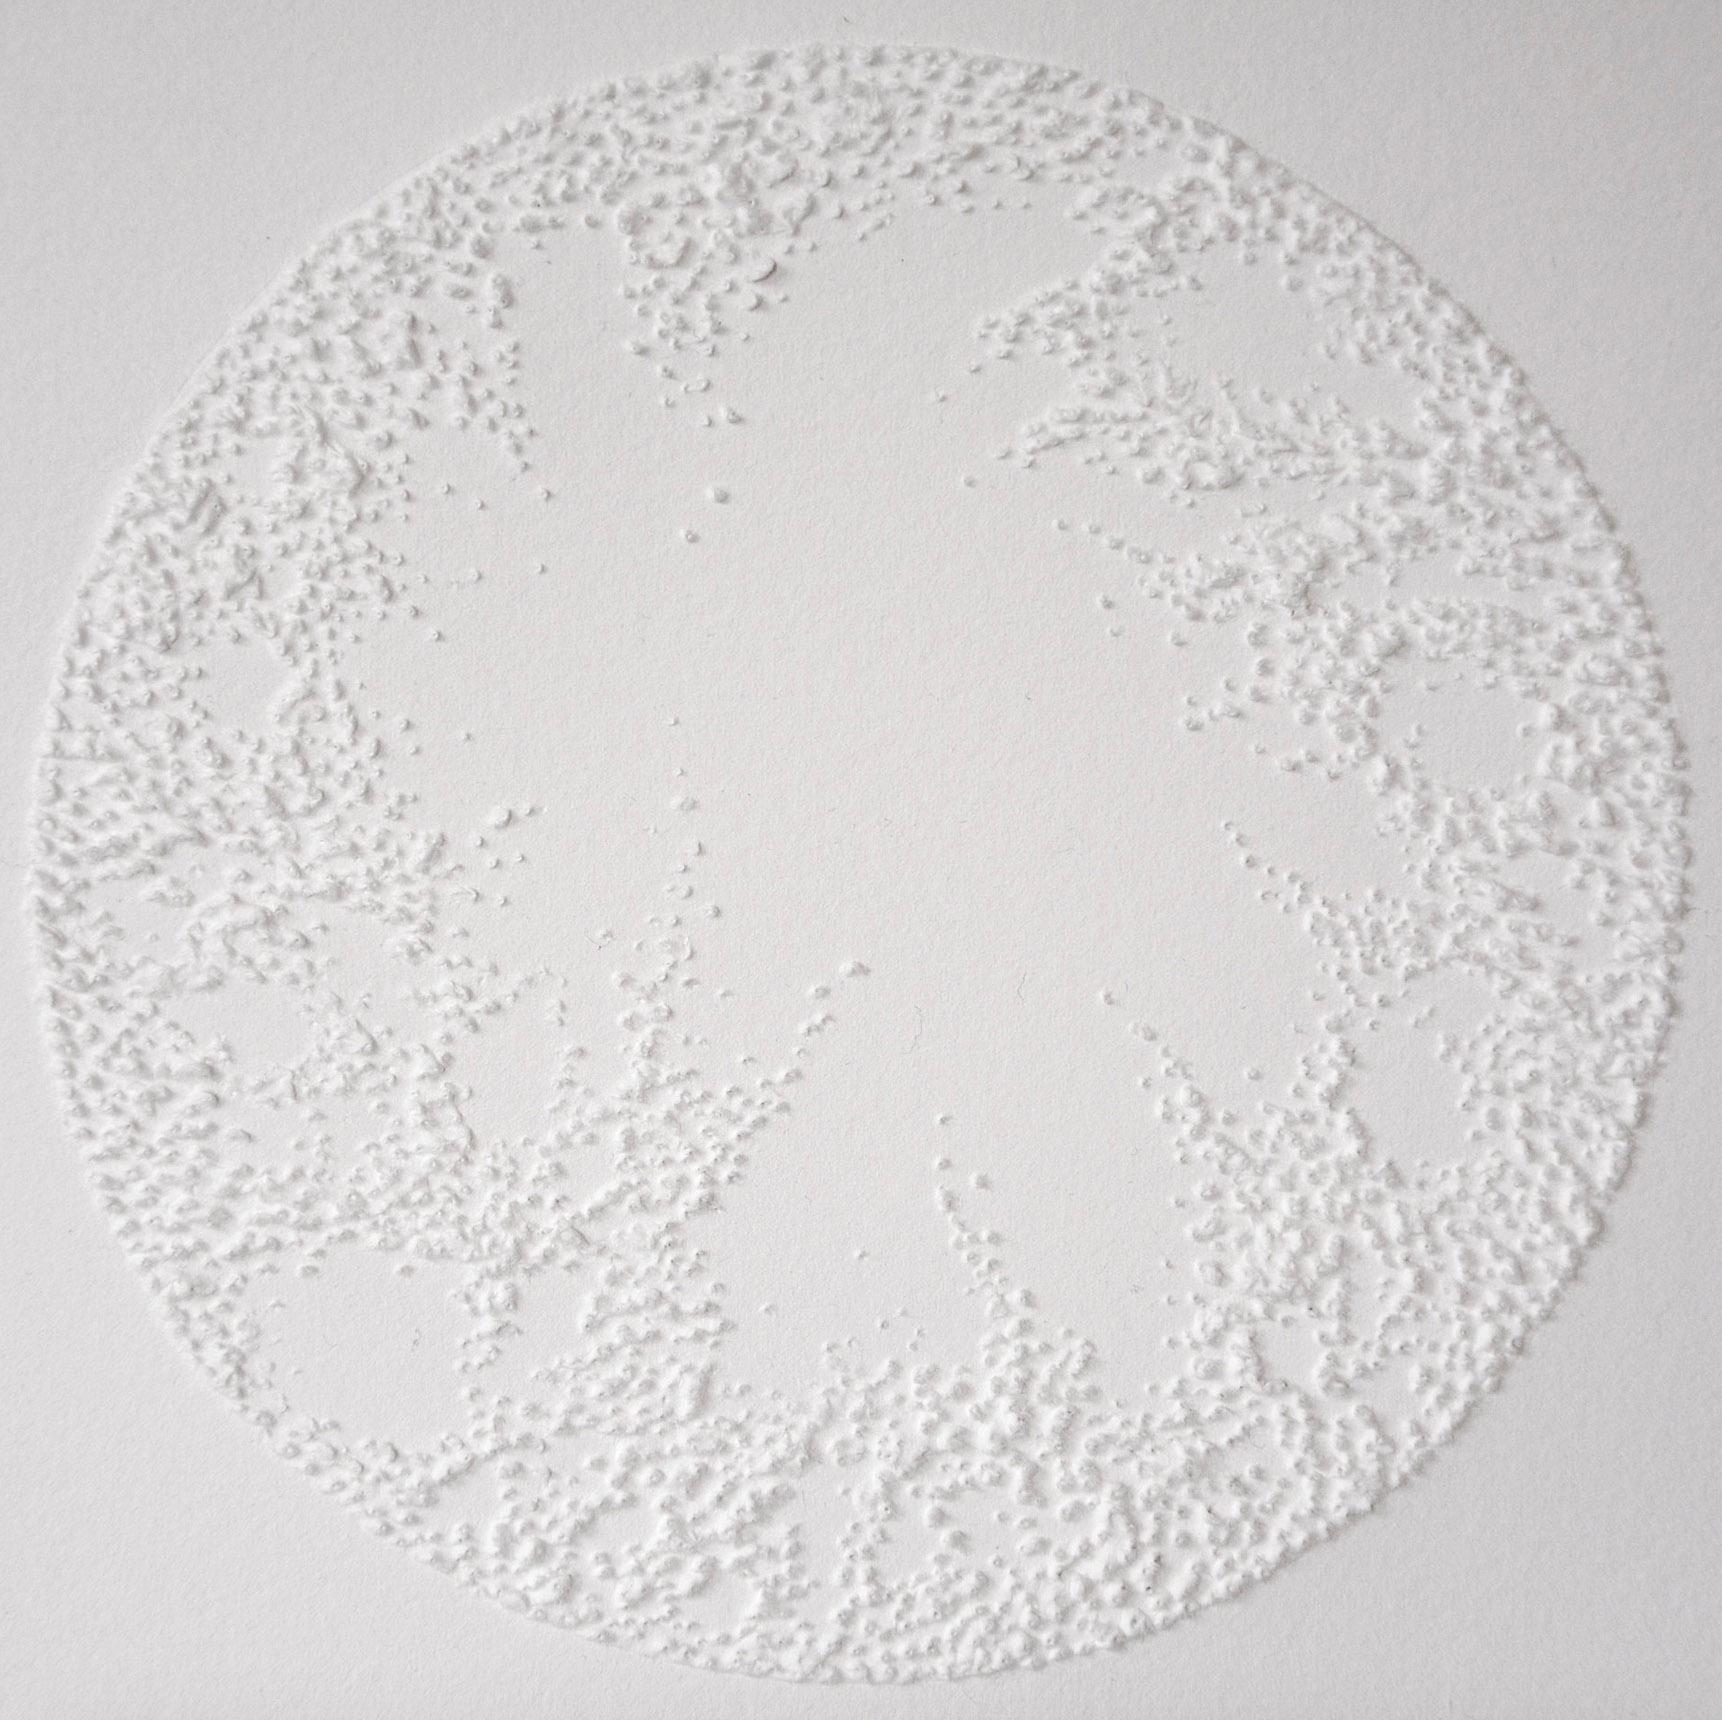 Antonin Anzil Abstract Sculpture - Circle 2 - intricate white 3D abstract geometric drypoint drawing on paper 